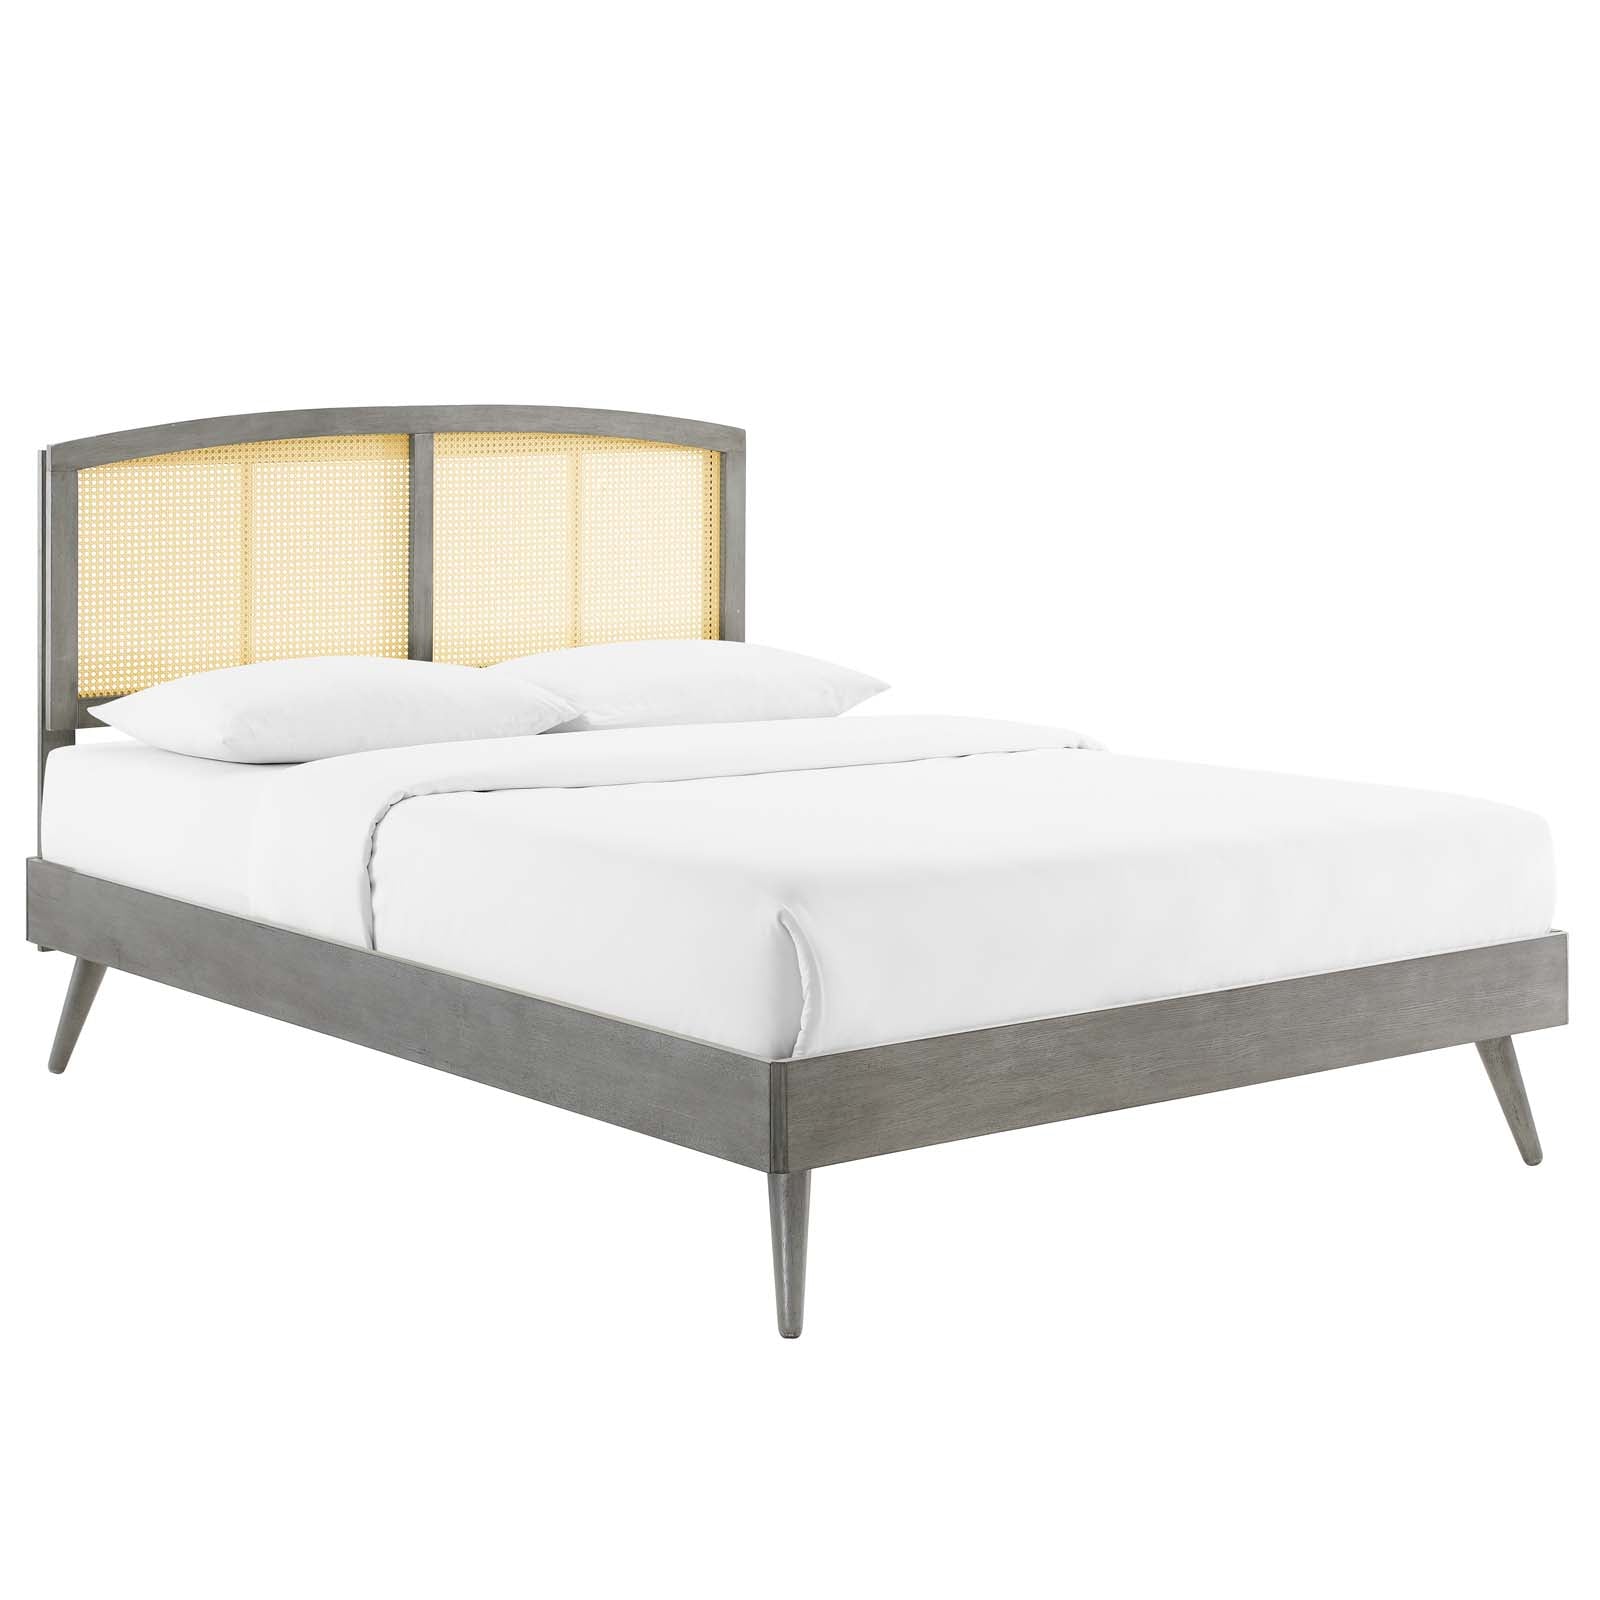 Sierra Cane and Wood King Platform Bed With Splayed Legs - East Shore Modern Home Furnishings